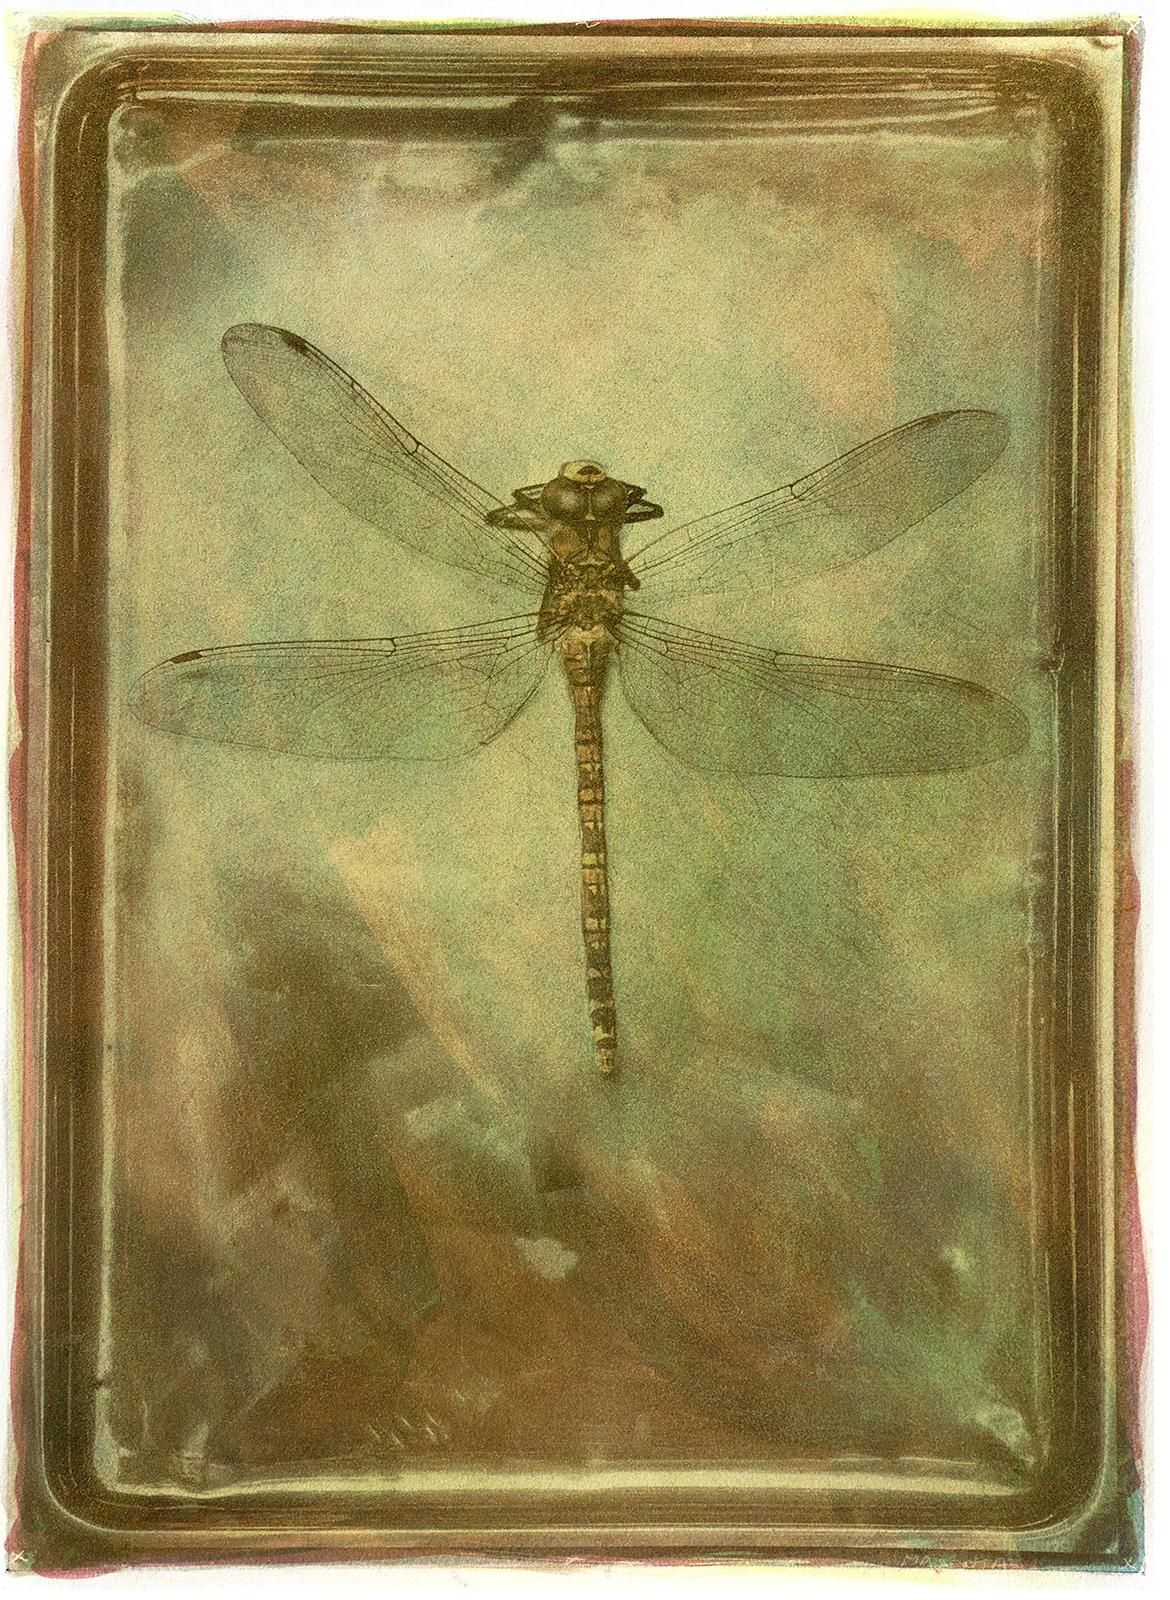 Ian Sanderson Color Photograph - Dragonfly - Signed limited edition fine art print, Contemporary, Insect